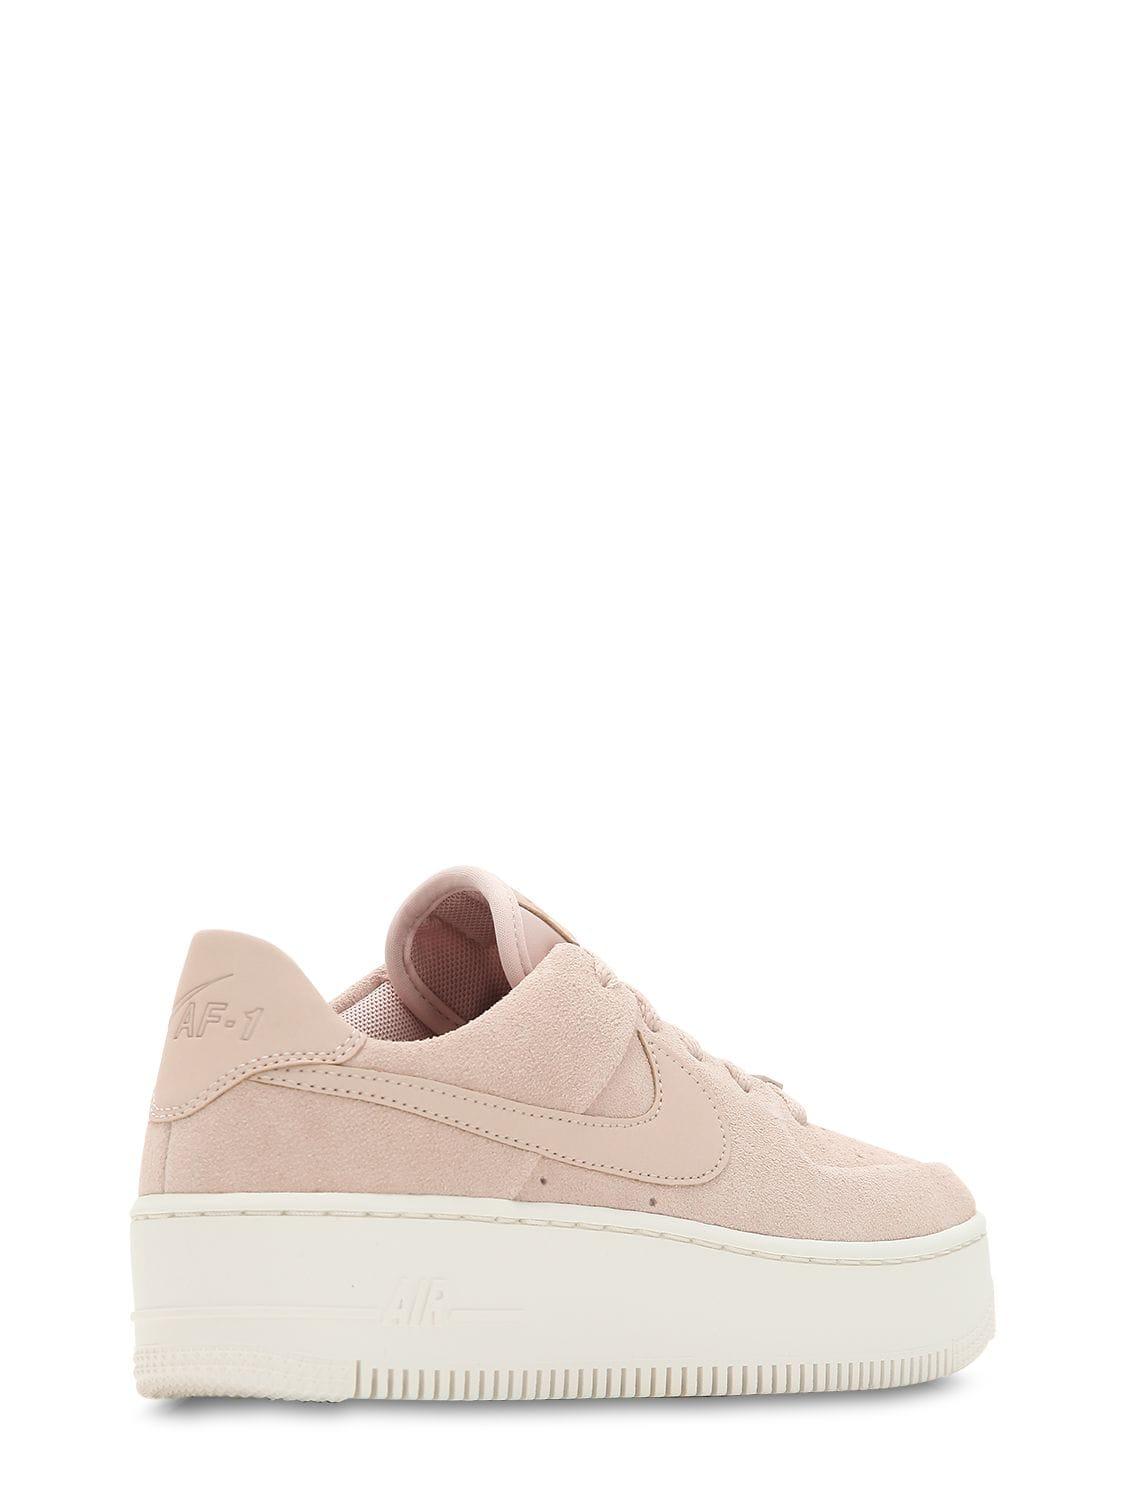 Nike Air Force 1 Pixel Shoe in Natural | Lyst